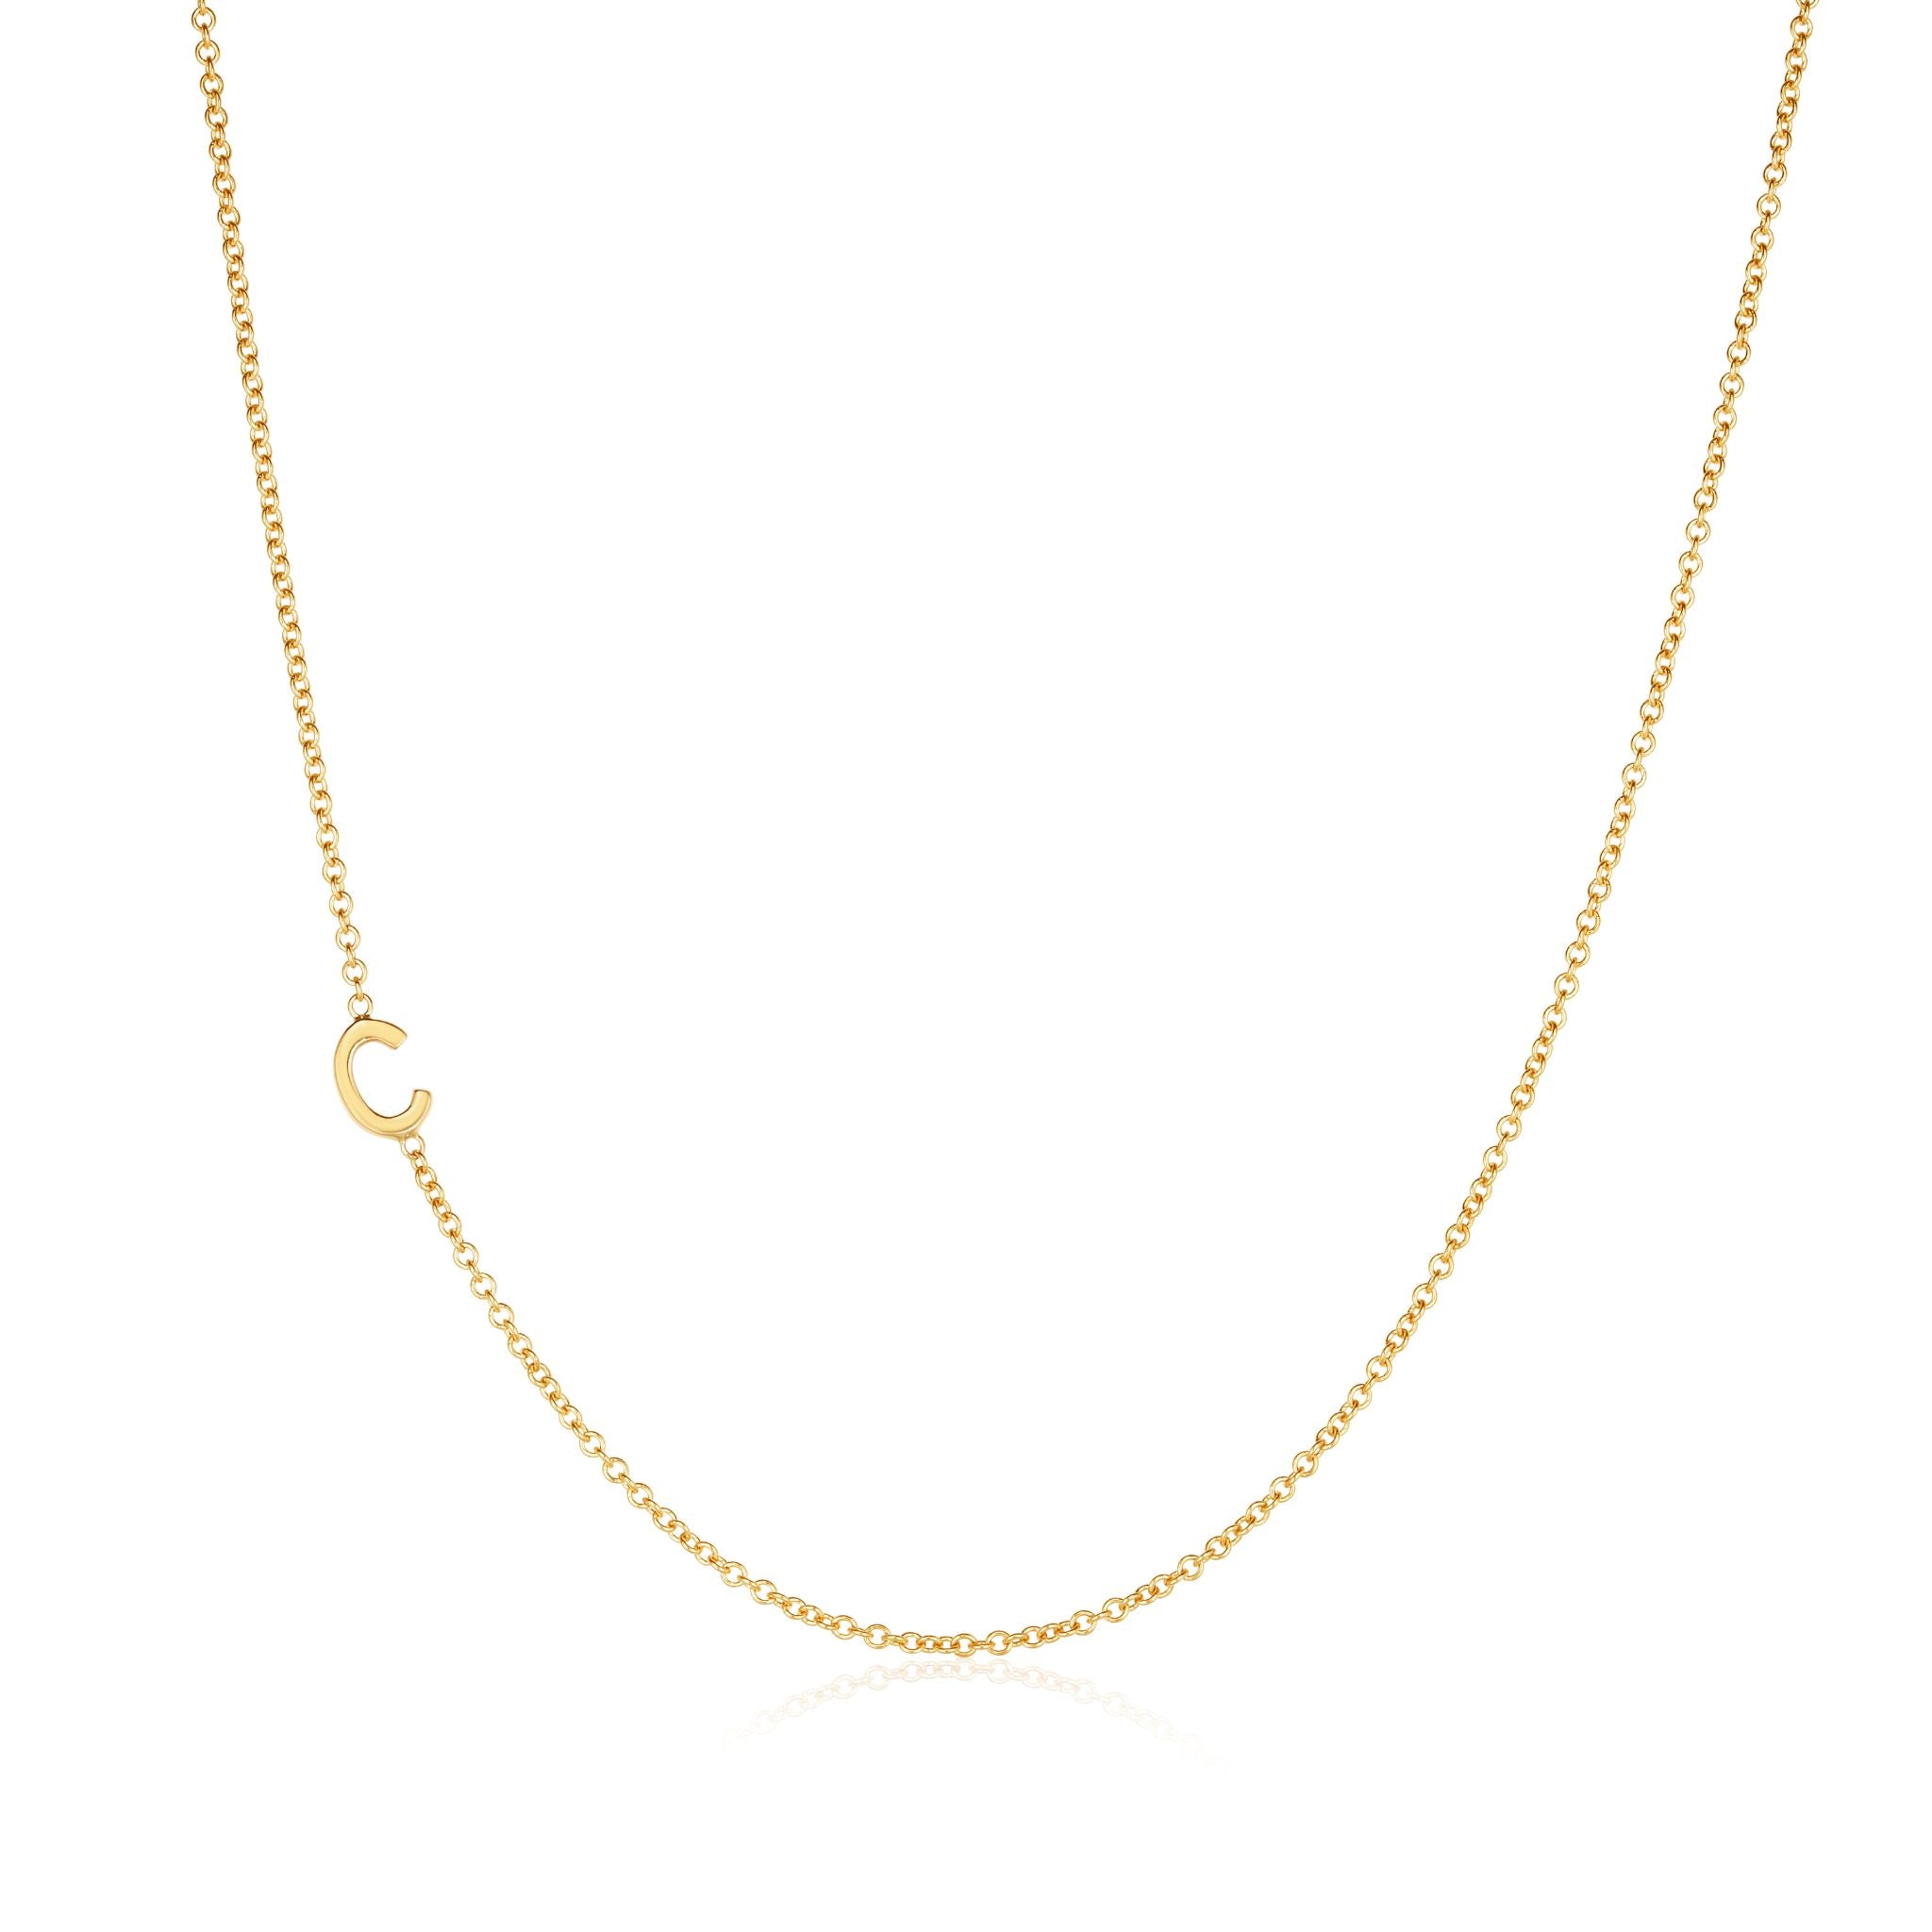 14K GOLD SIMPLE INITIAL CHAIN NECKLACE